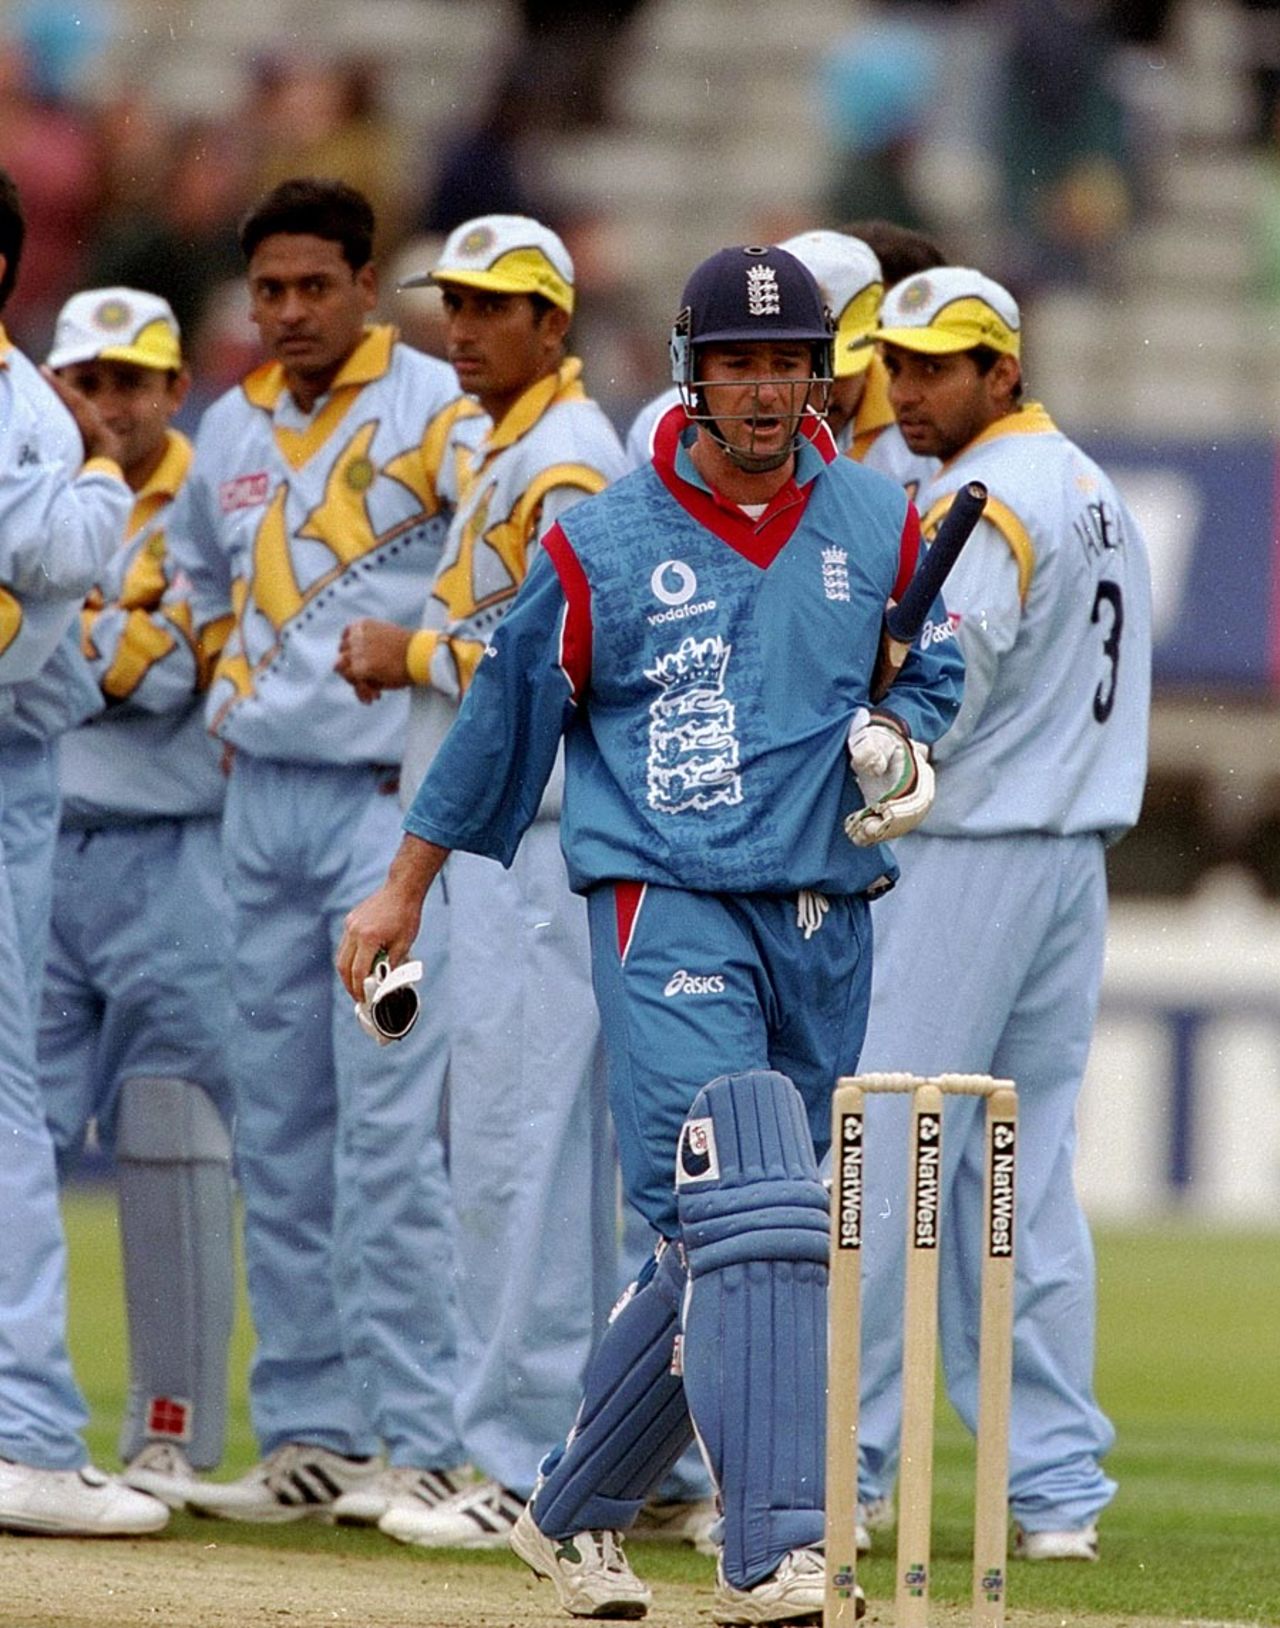 Graham Thorpe walks back after being given out lbw, India v England, World Cup, Birmingham, May 30, 1999